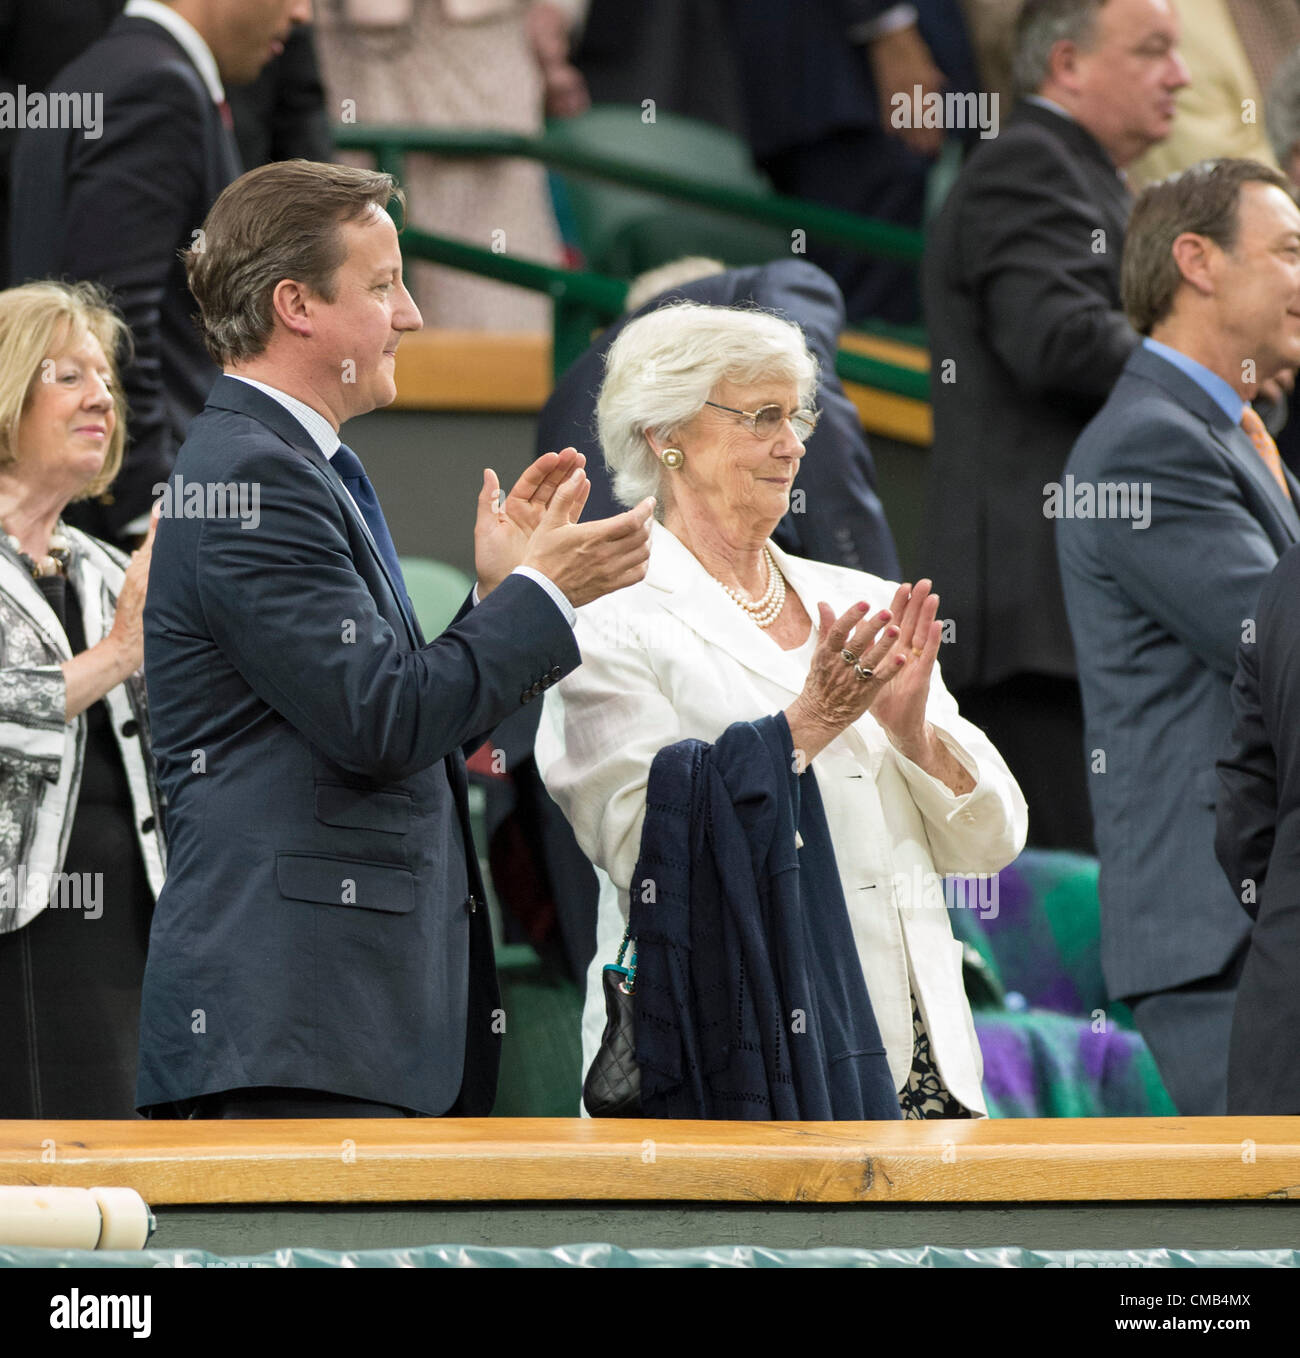 08.07.2012. The Wimbledon Tennis Championships 2012 held at The All England Lawn Tennis and Croquet Club, London, England, UK.  Men's Final. Roger FEDERER (SUI) [3] v Andy MURRAY (GBR) [4]   British Prime Minister David Cameron in the Royal Box. Stock Photo